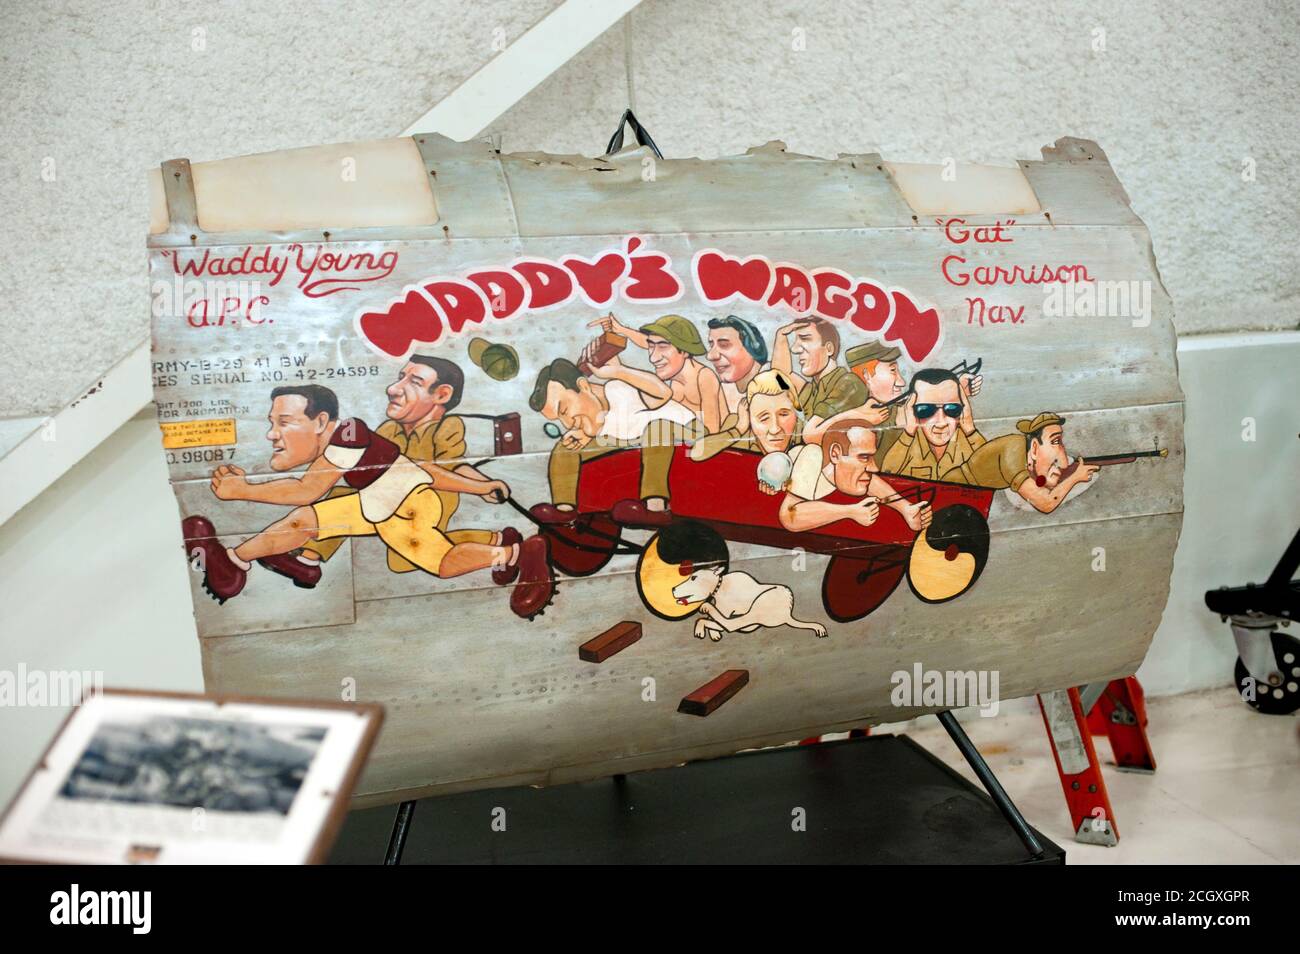 World War II nose art of Waddy's Wagon, Walter 'Waddy' R Young 869th Bombardment Squadron, Lone Star Flight Museum, on site in Galveston, Texas 2016. Stock Photo